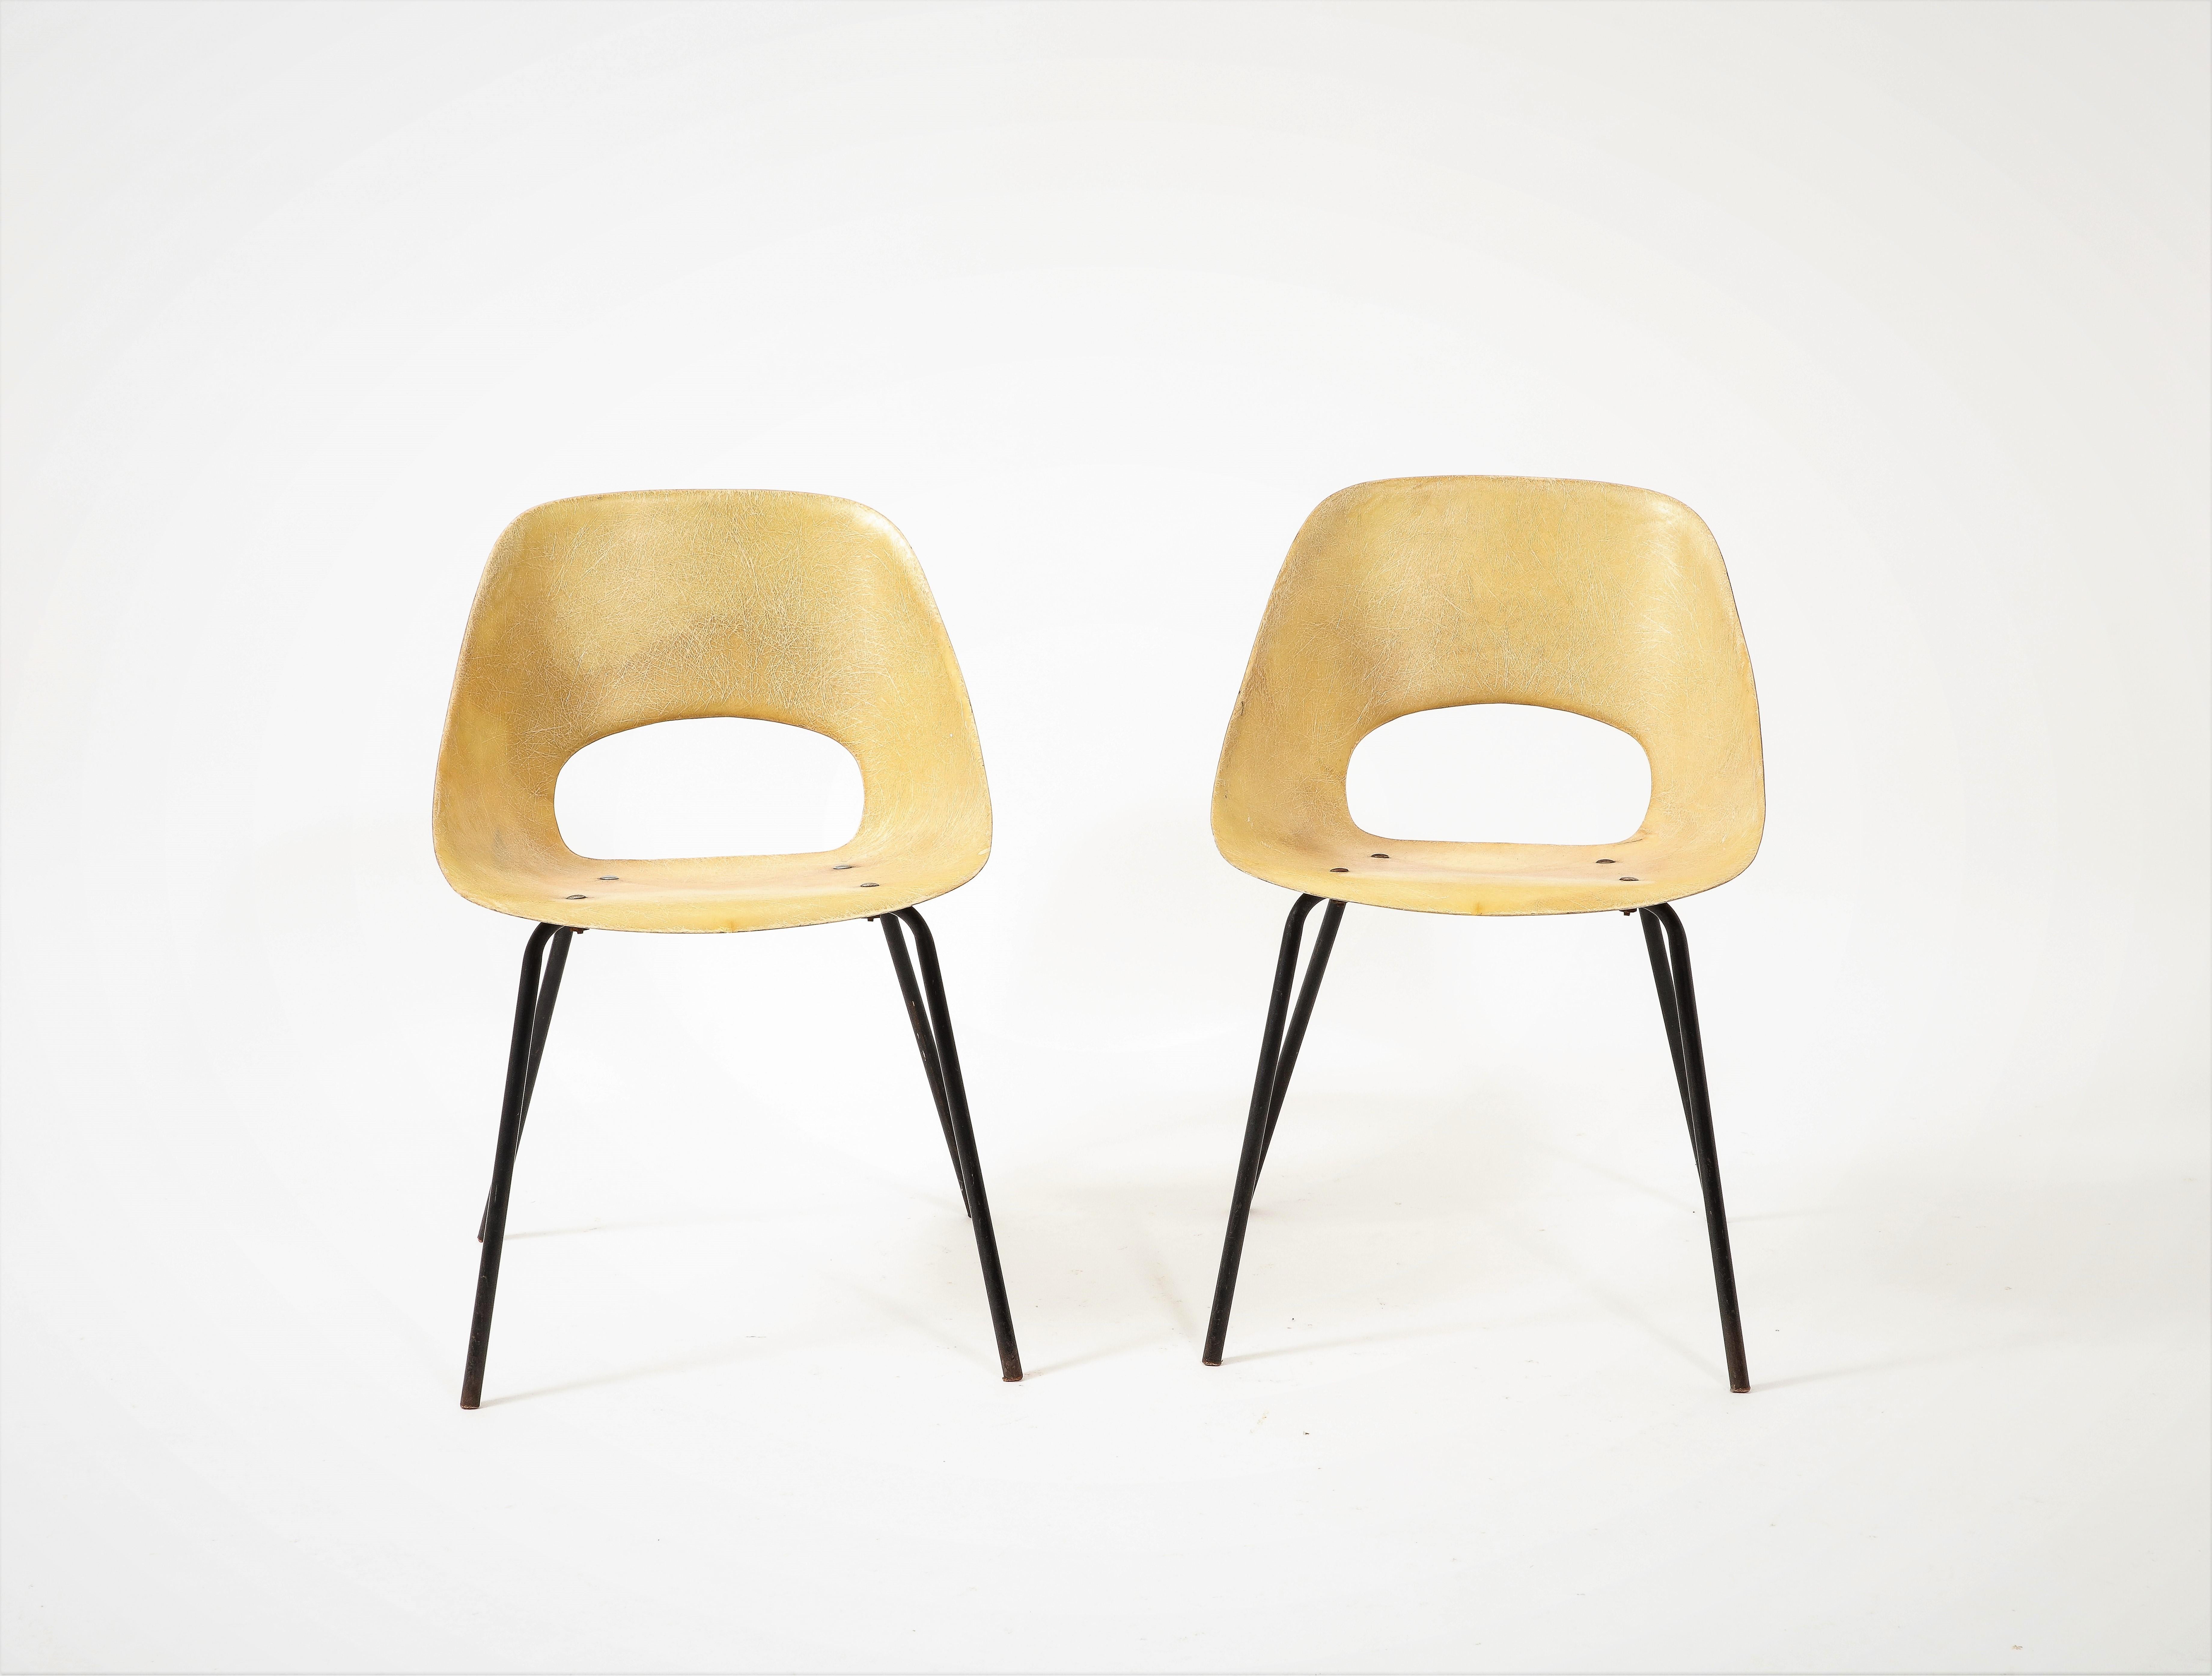 Pair of Pierre Guariche Yellow Fiberglass Side Chairs by Steiner - France 1950's In Good Condition For Sale In New York, NY